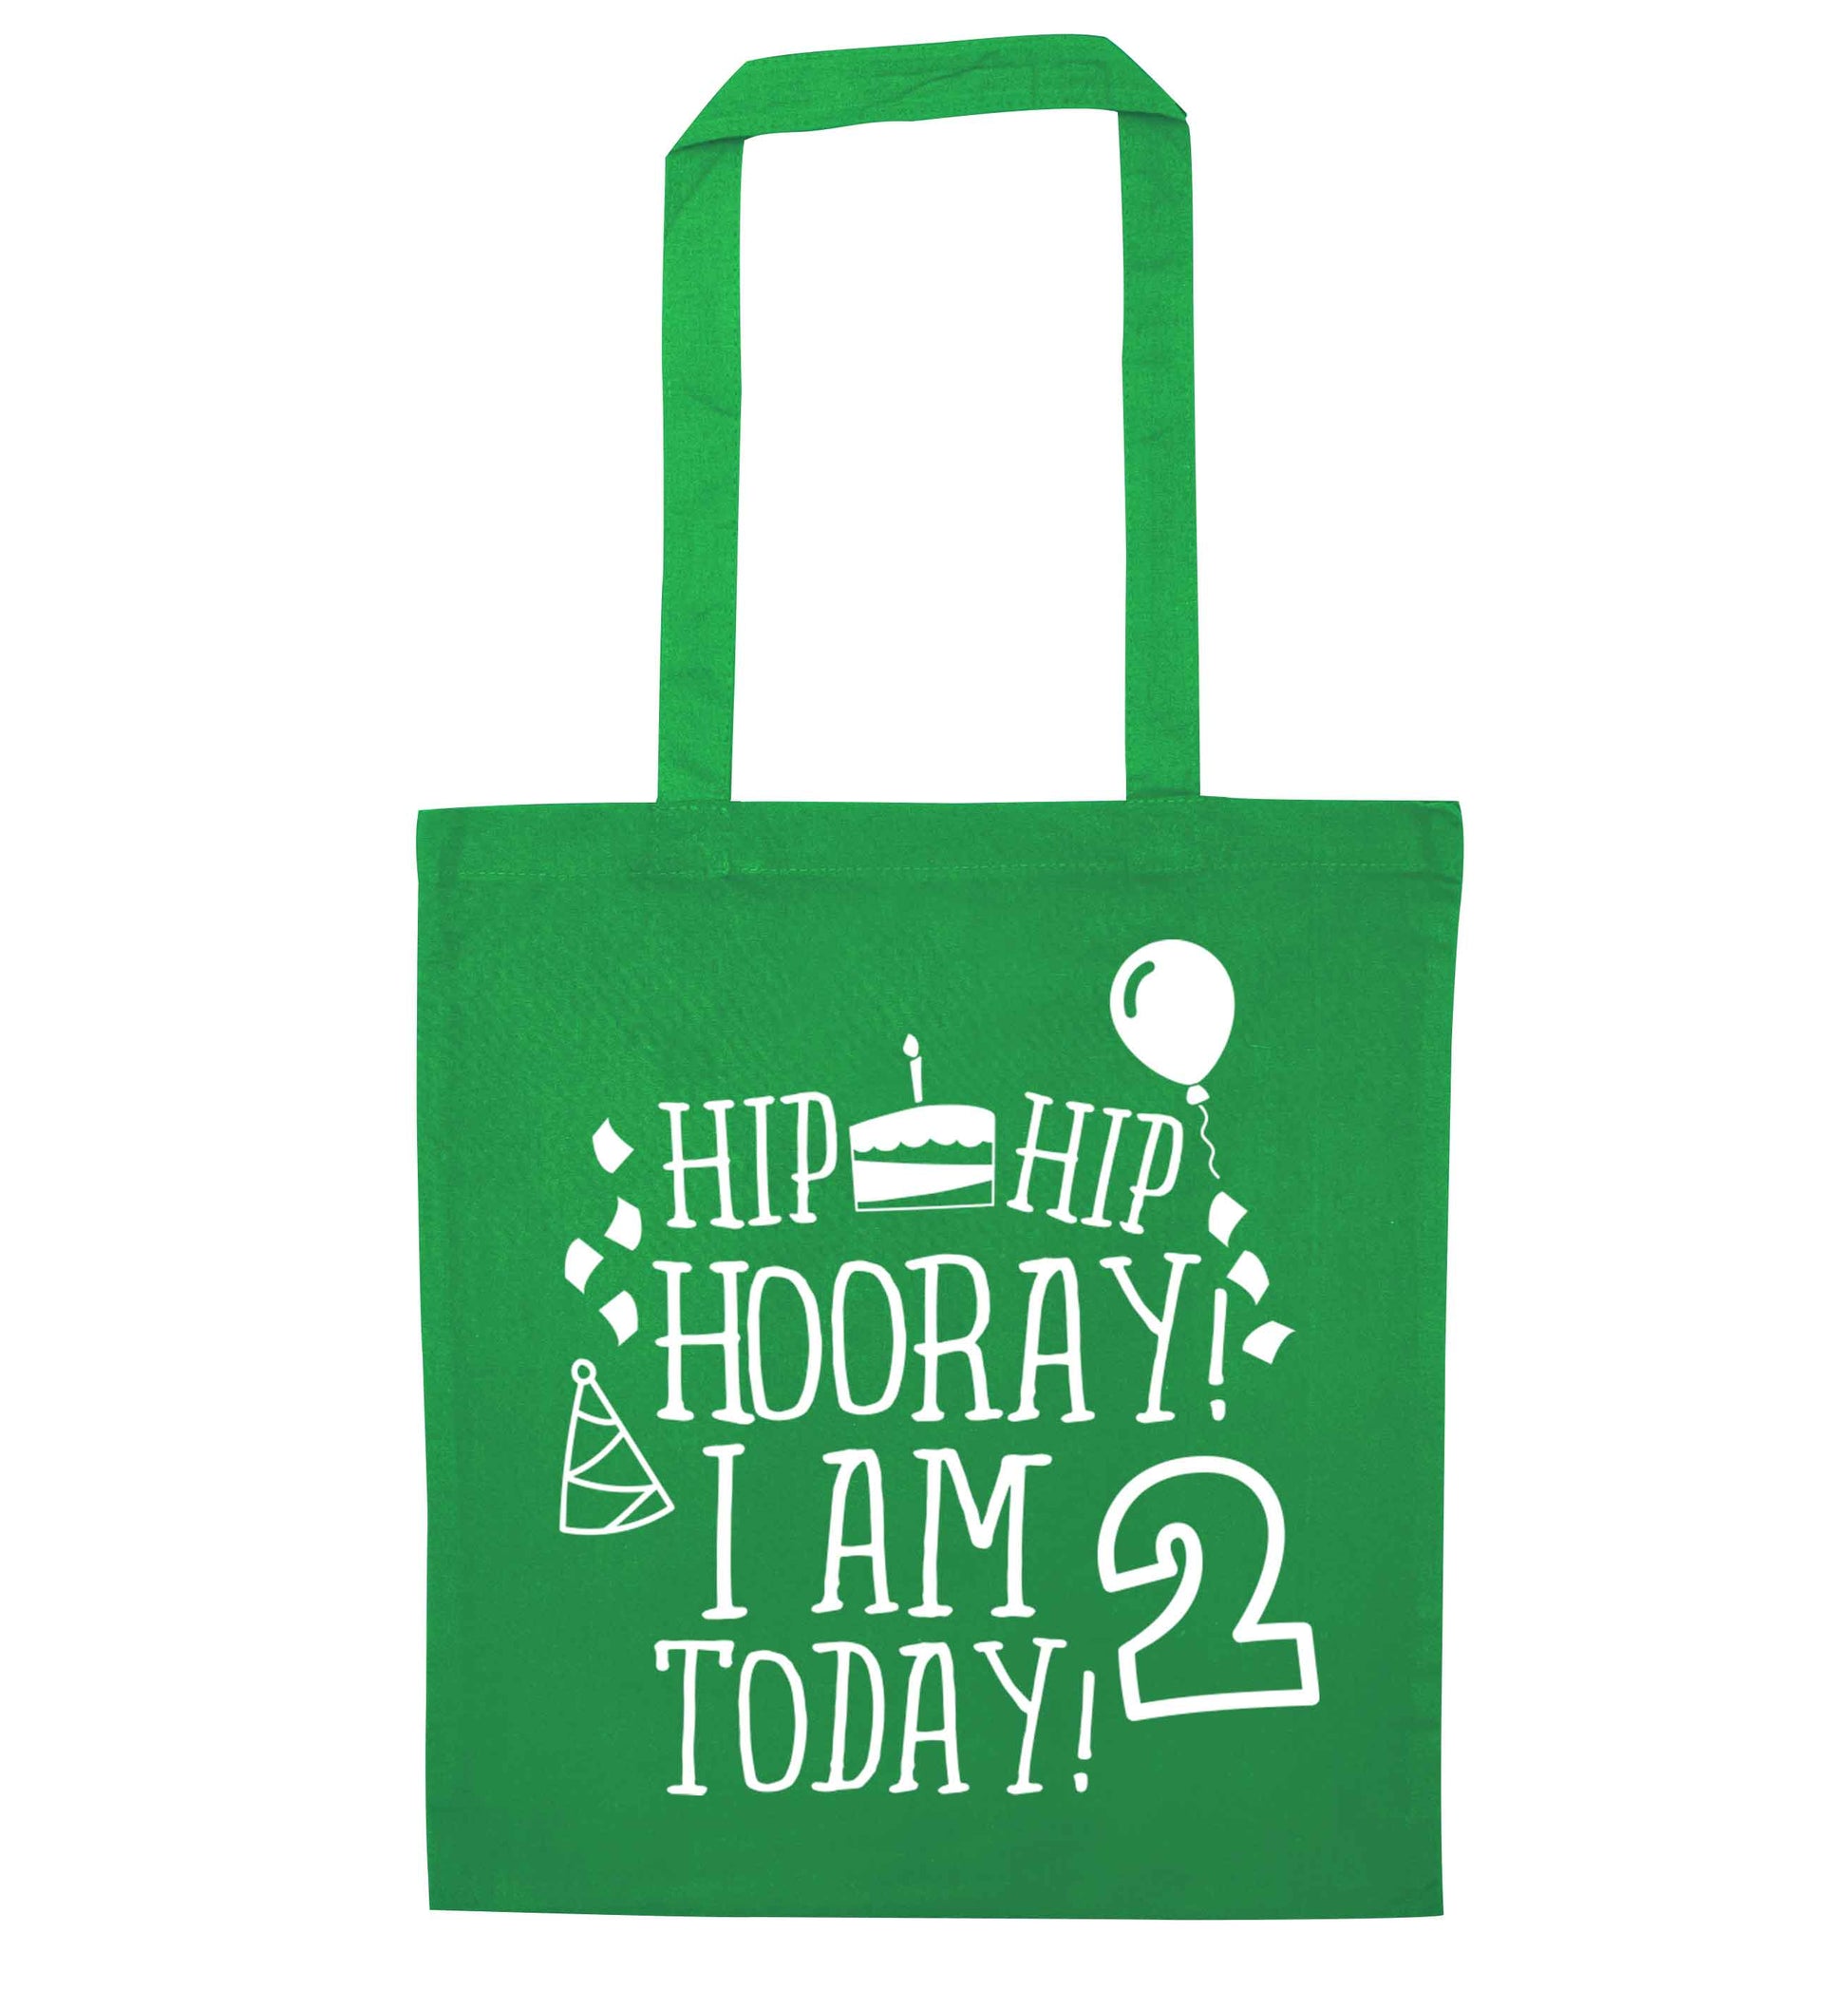 I'm 2 Today green tote bag